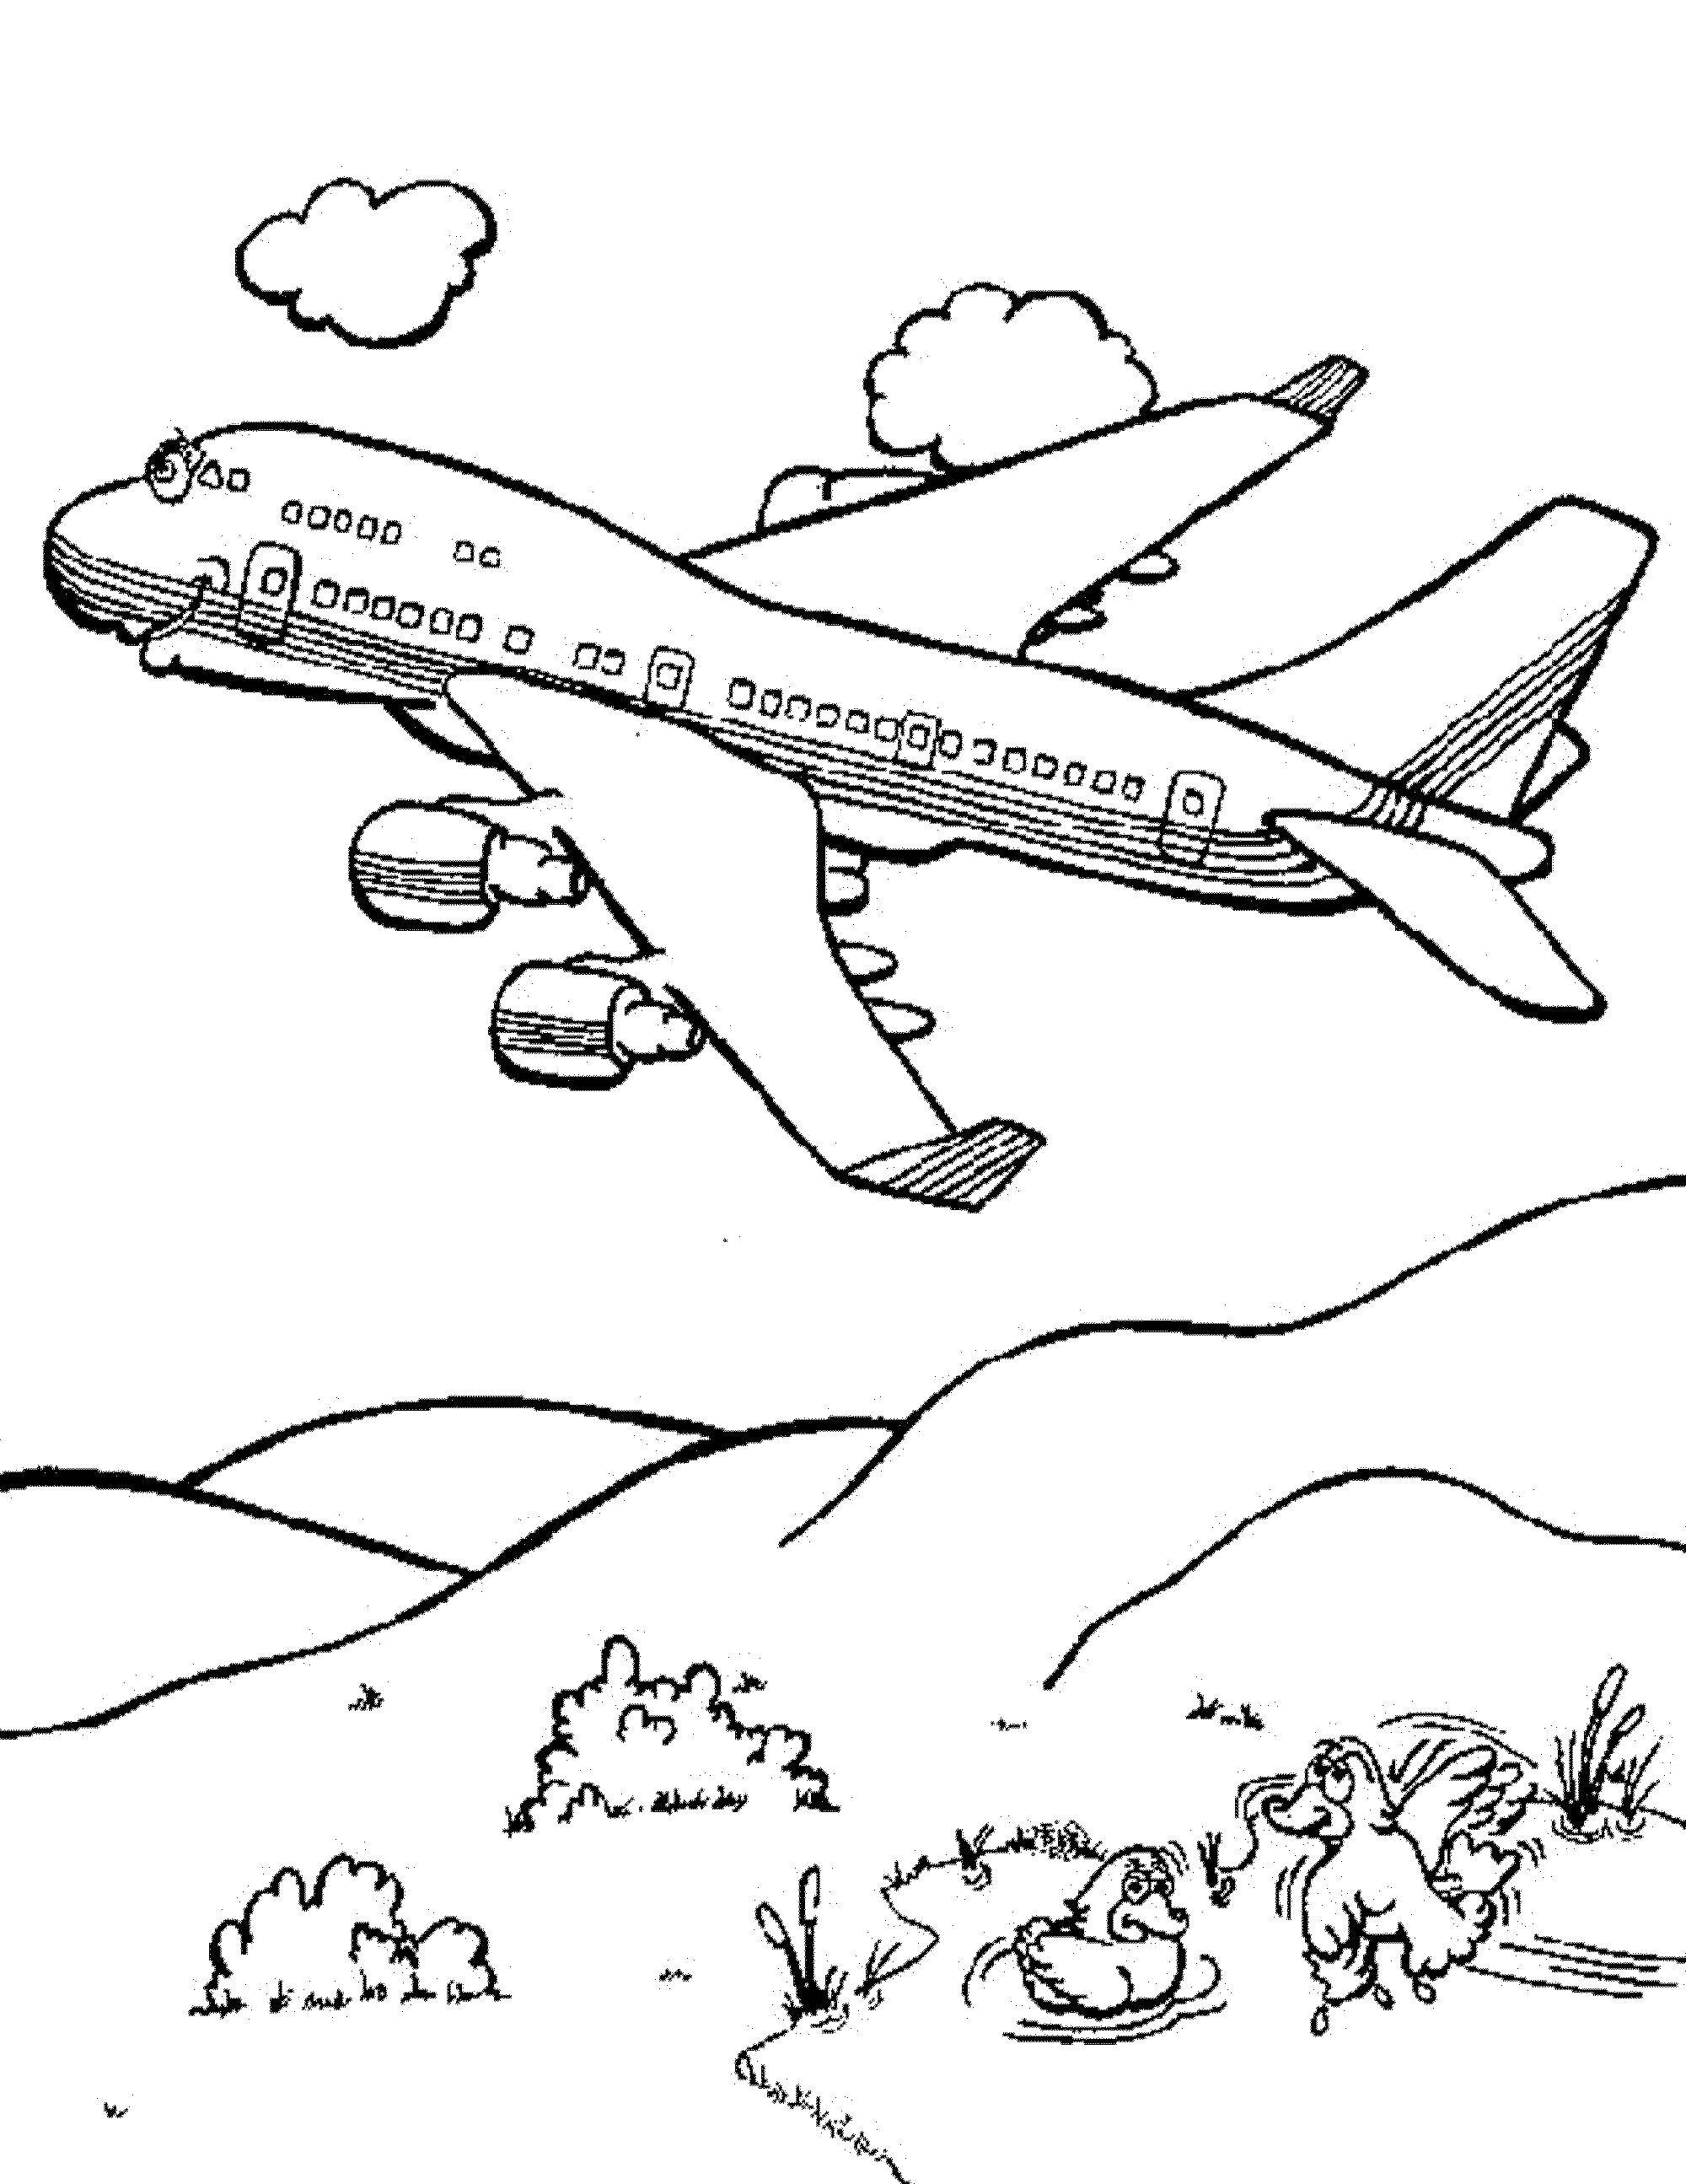 Coloring The plane. Category The planes. Tags:  the plane, field.